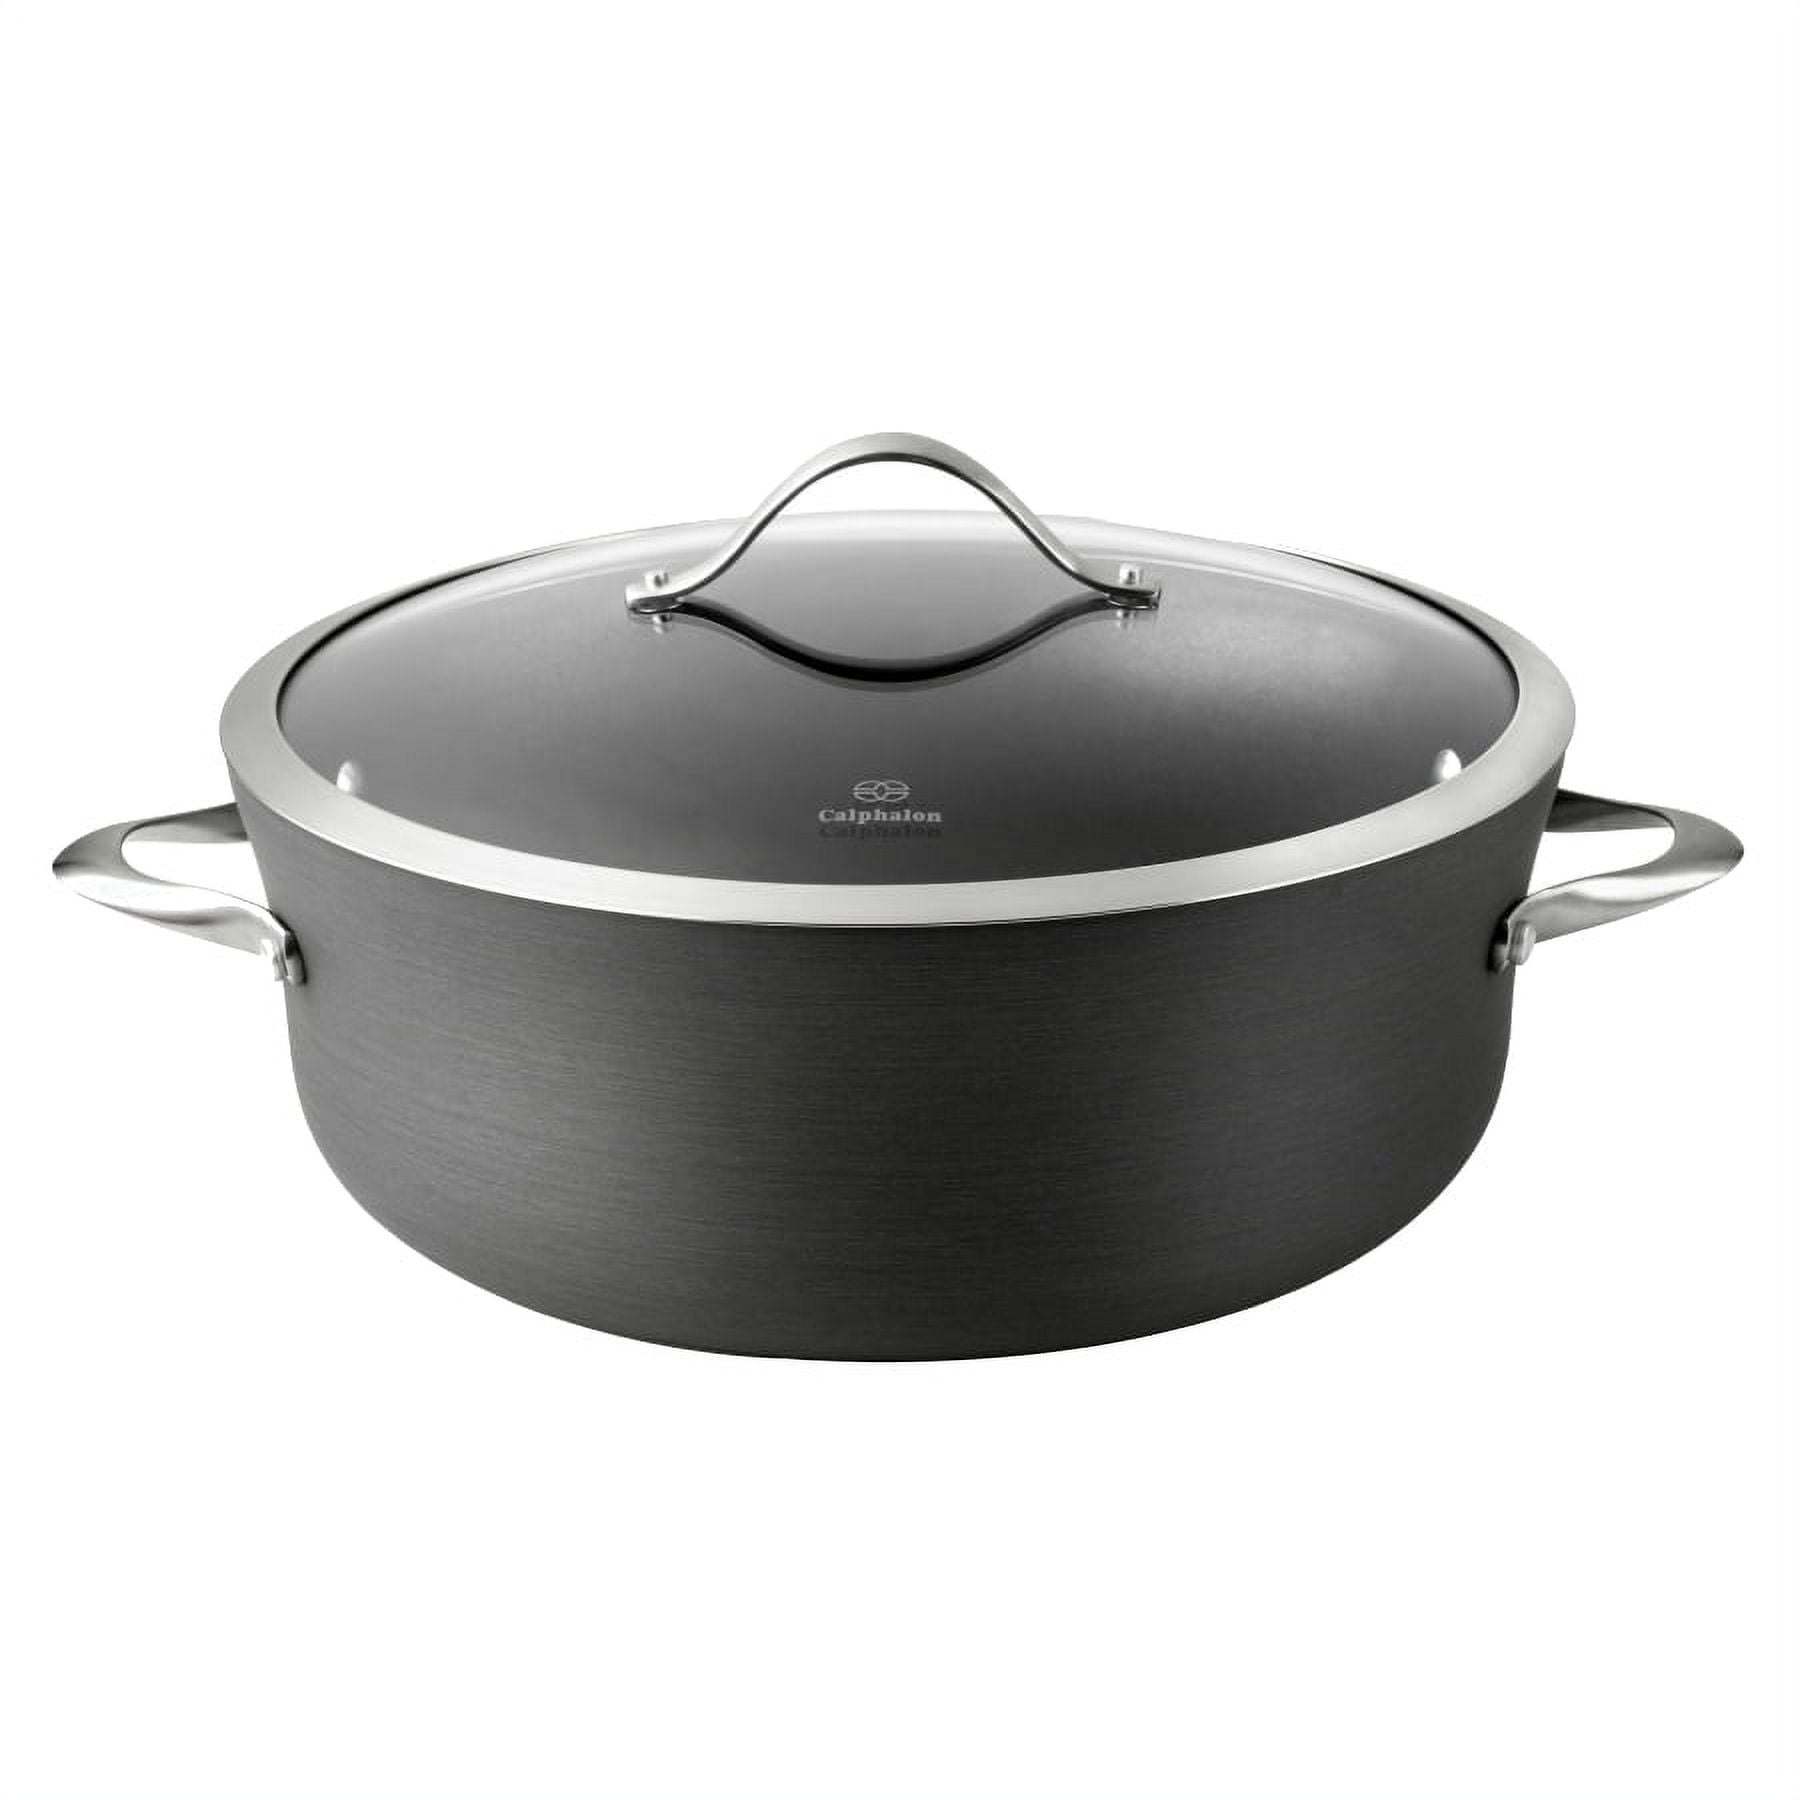  Professional 8 Quart Nonstick Dutch Oven with Glass